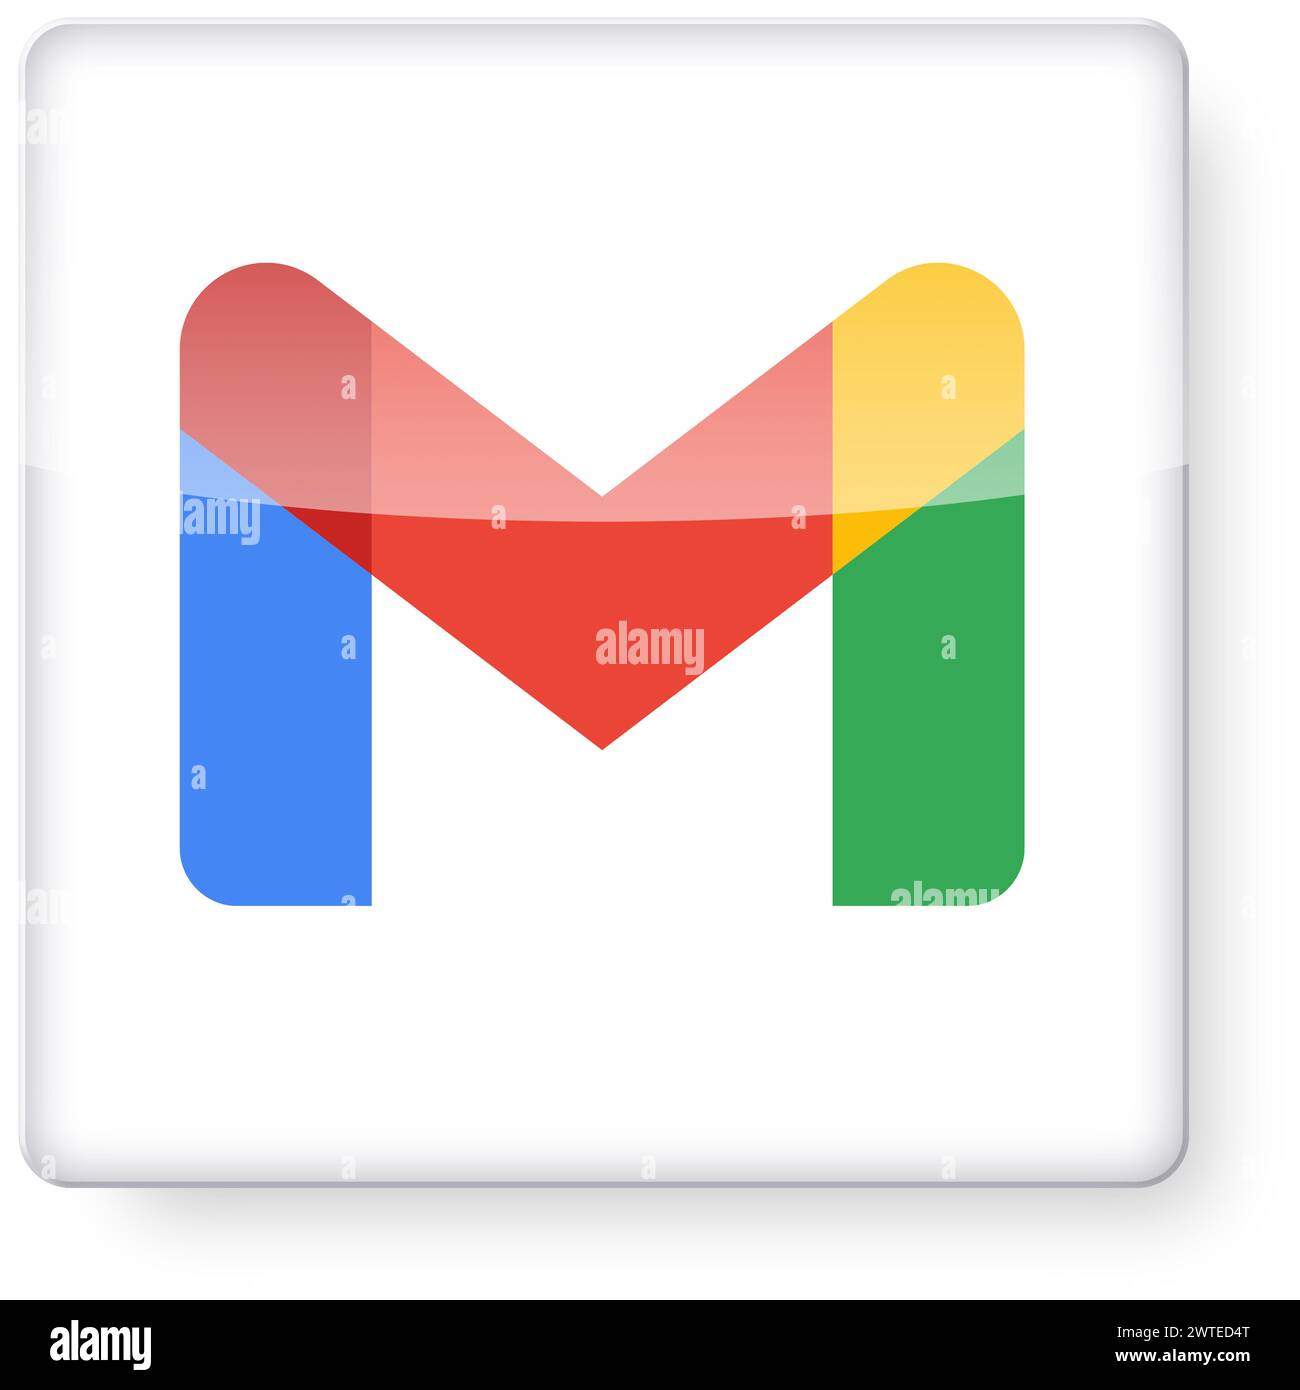 Gmail logo as an app icon. Clipping path included. Stock Photo